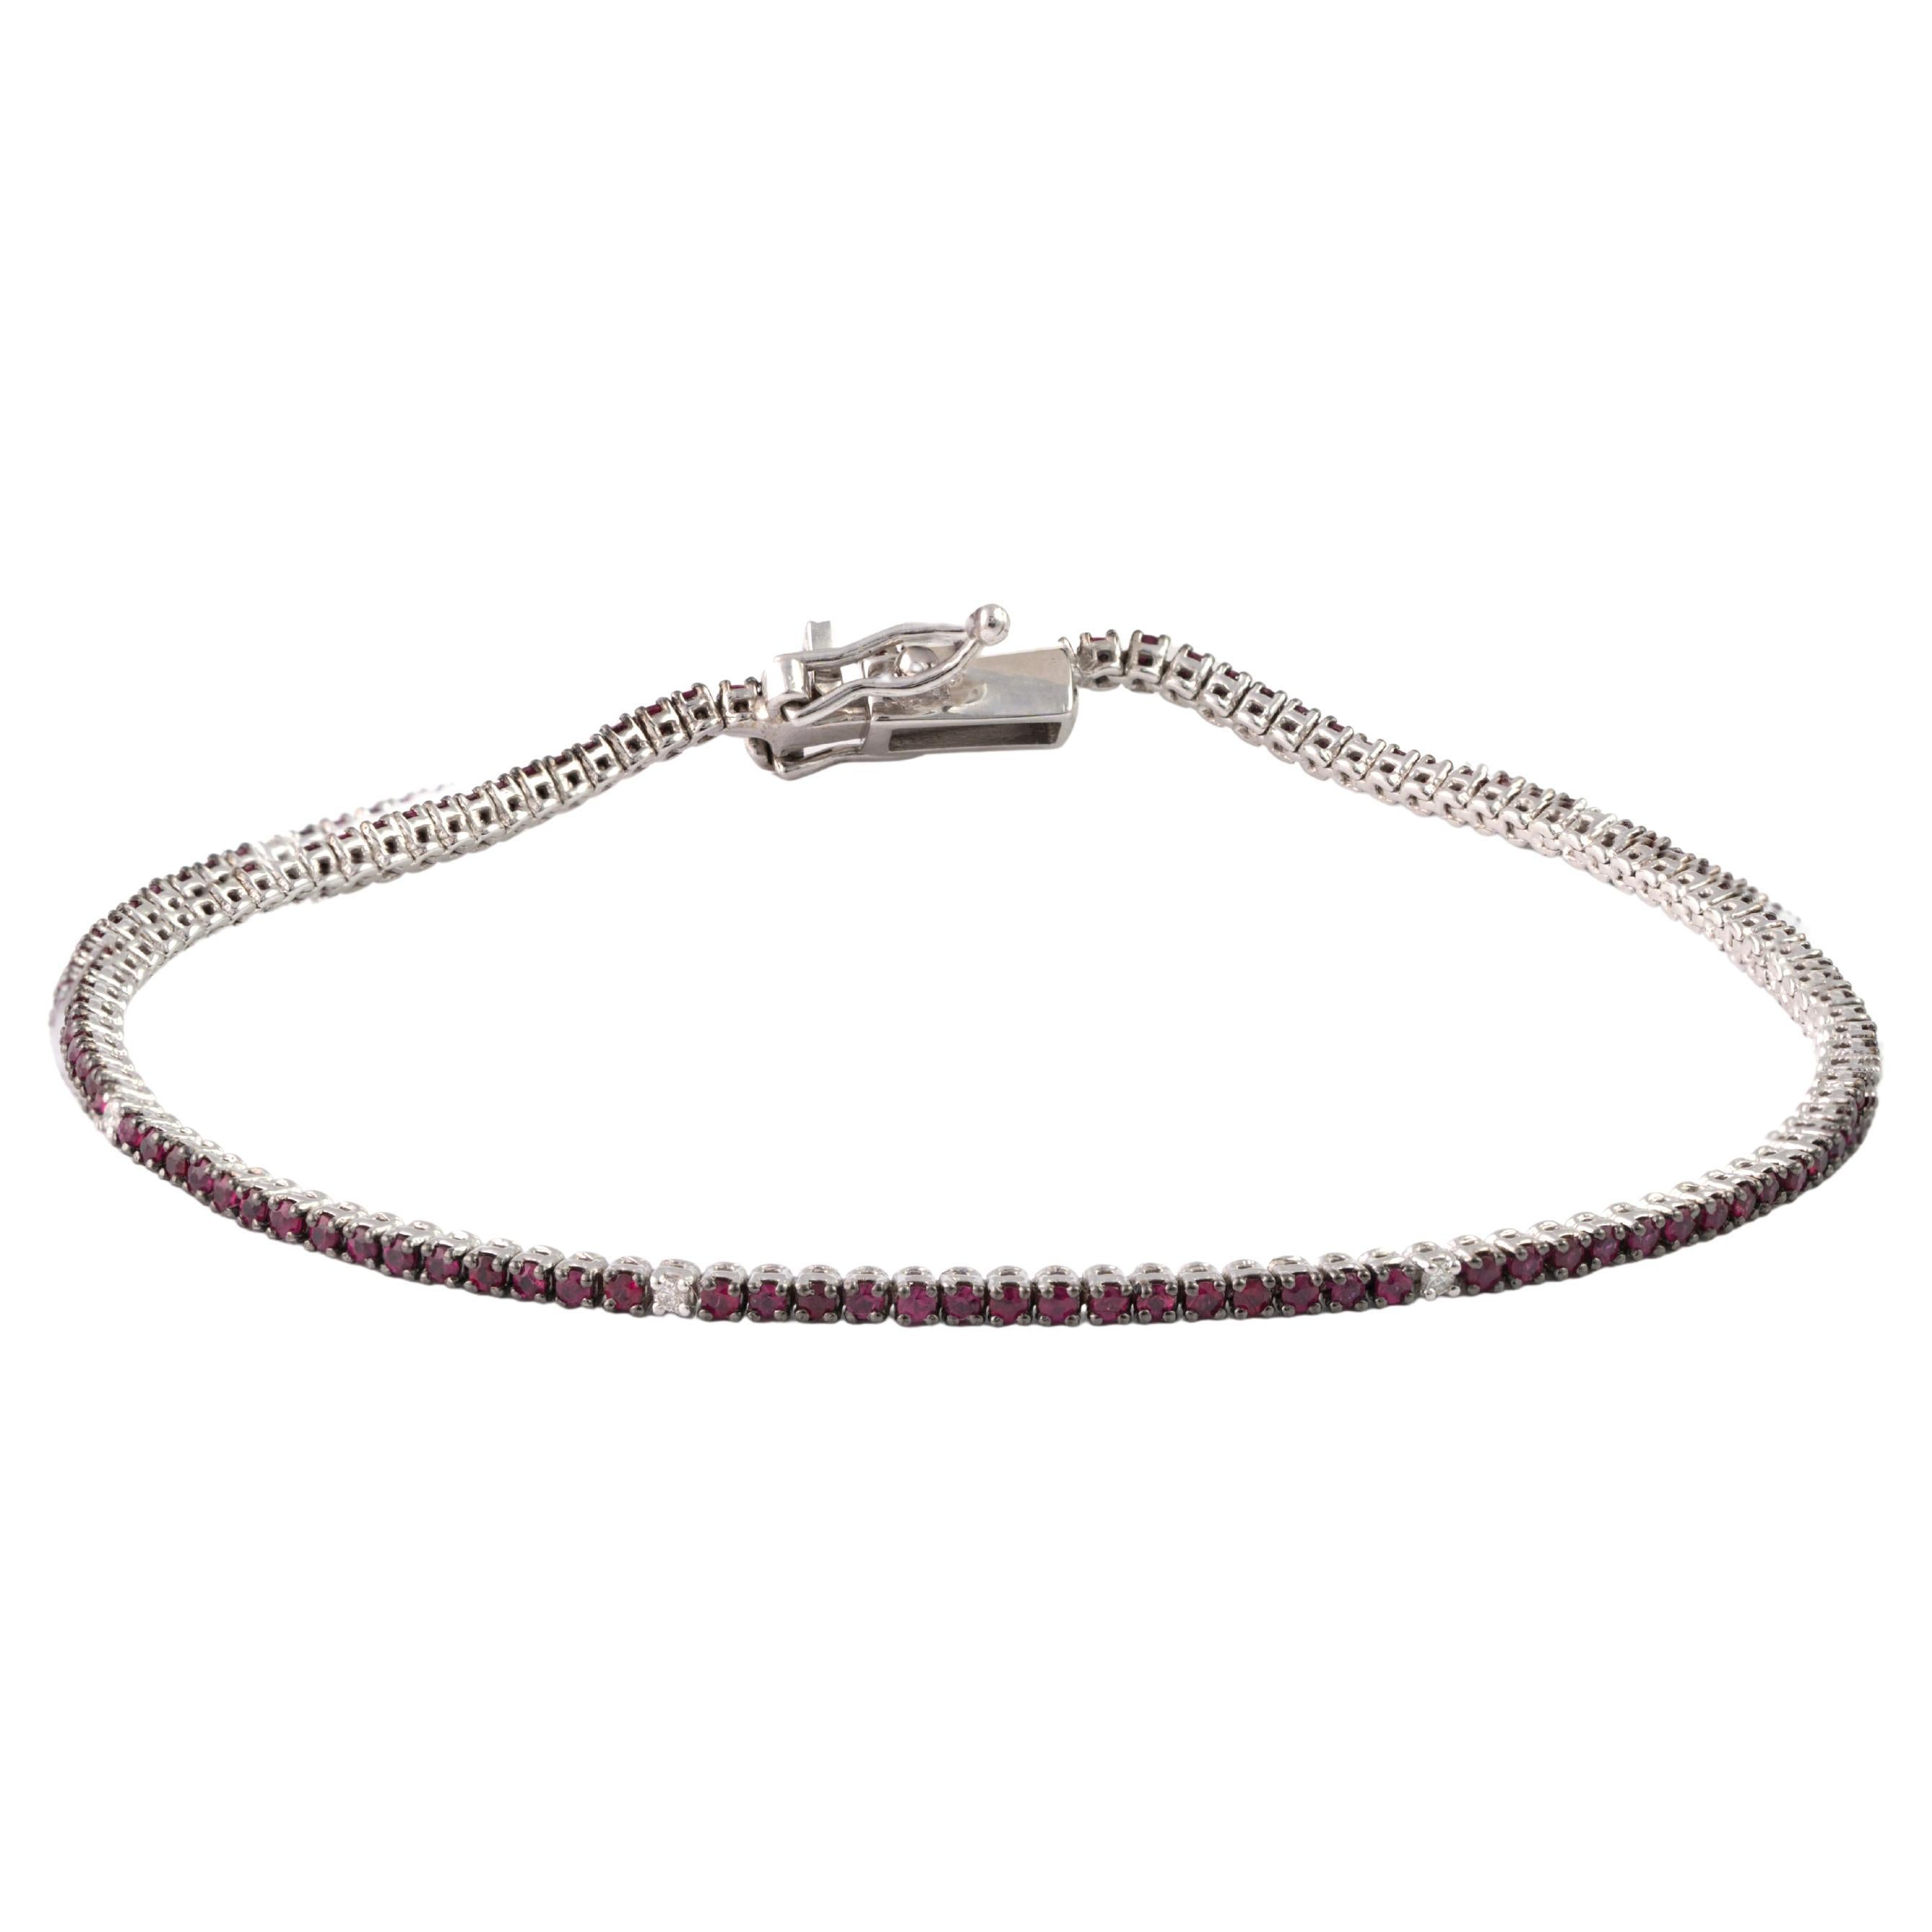 Natural Ruby 1 .08 Carats and 0.07 Carats Diamond Tennis Bracelet in 18k Gold